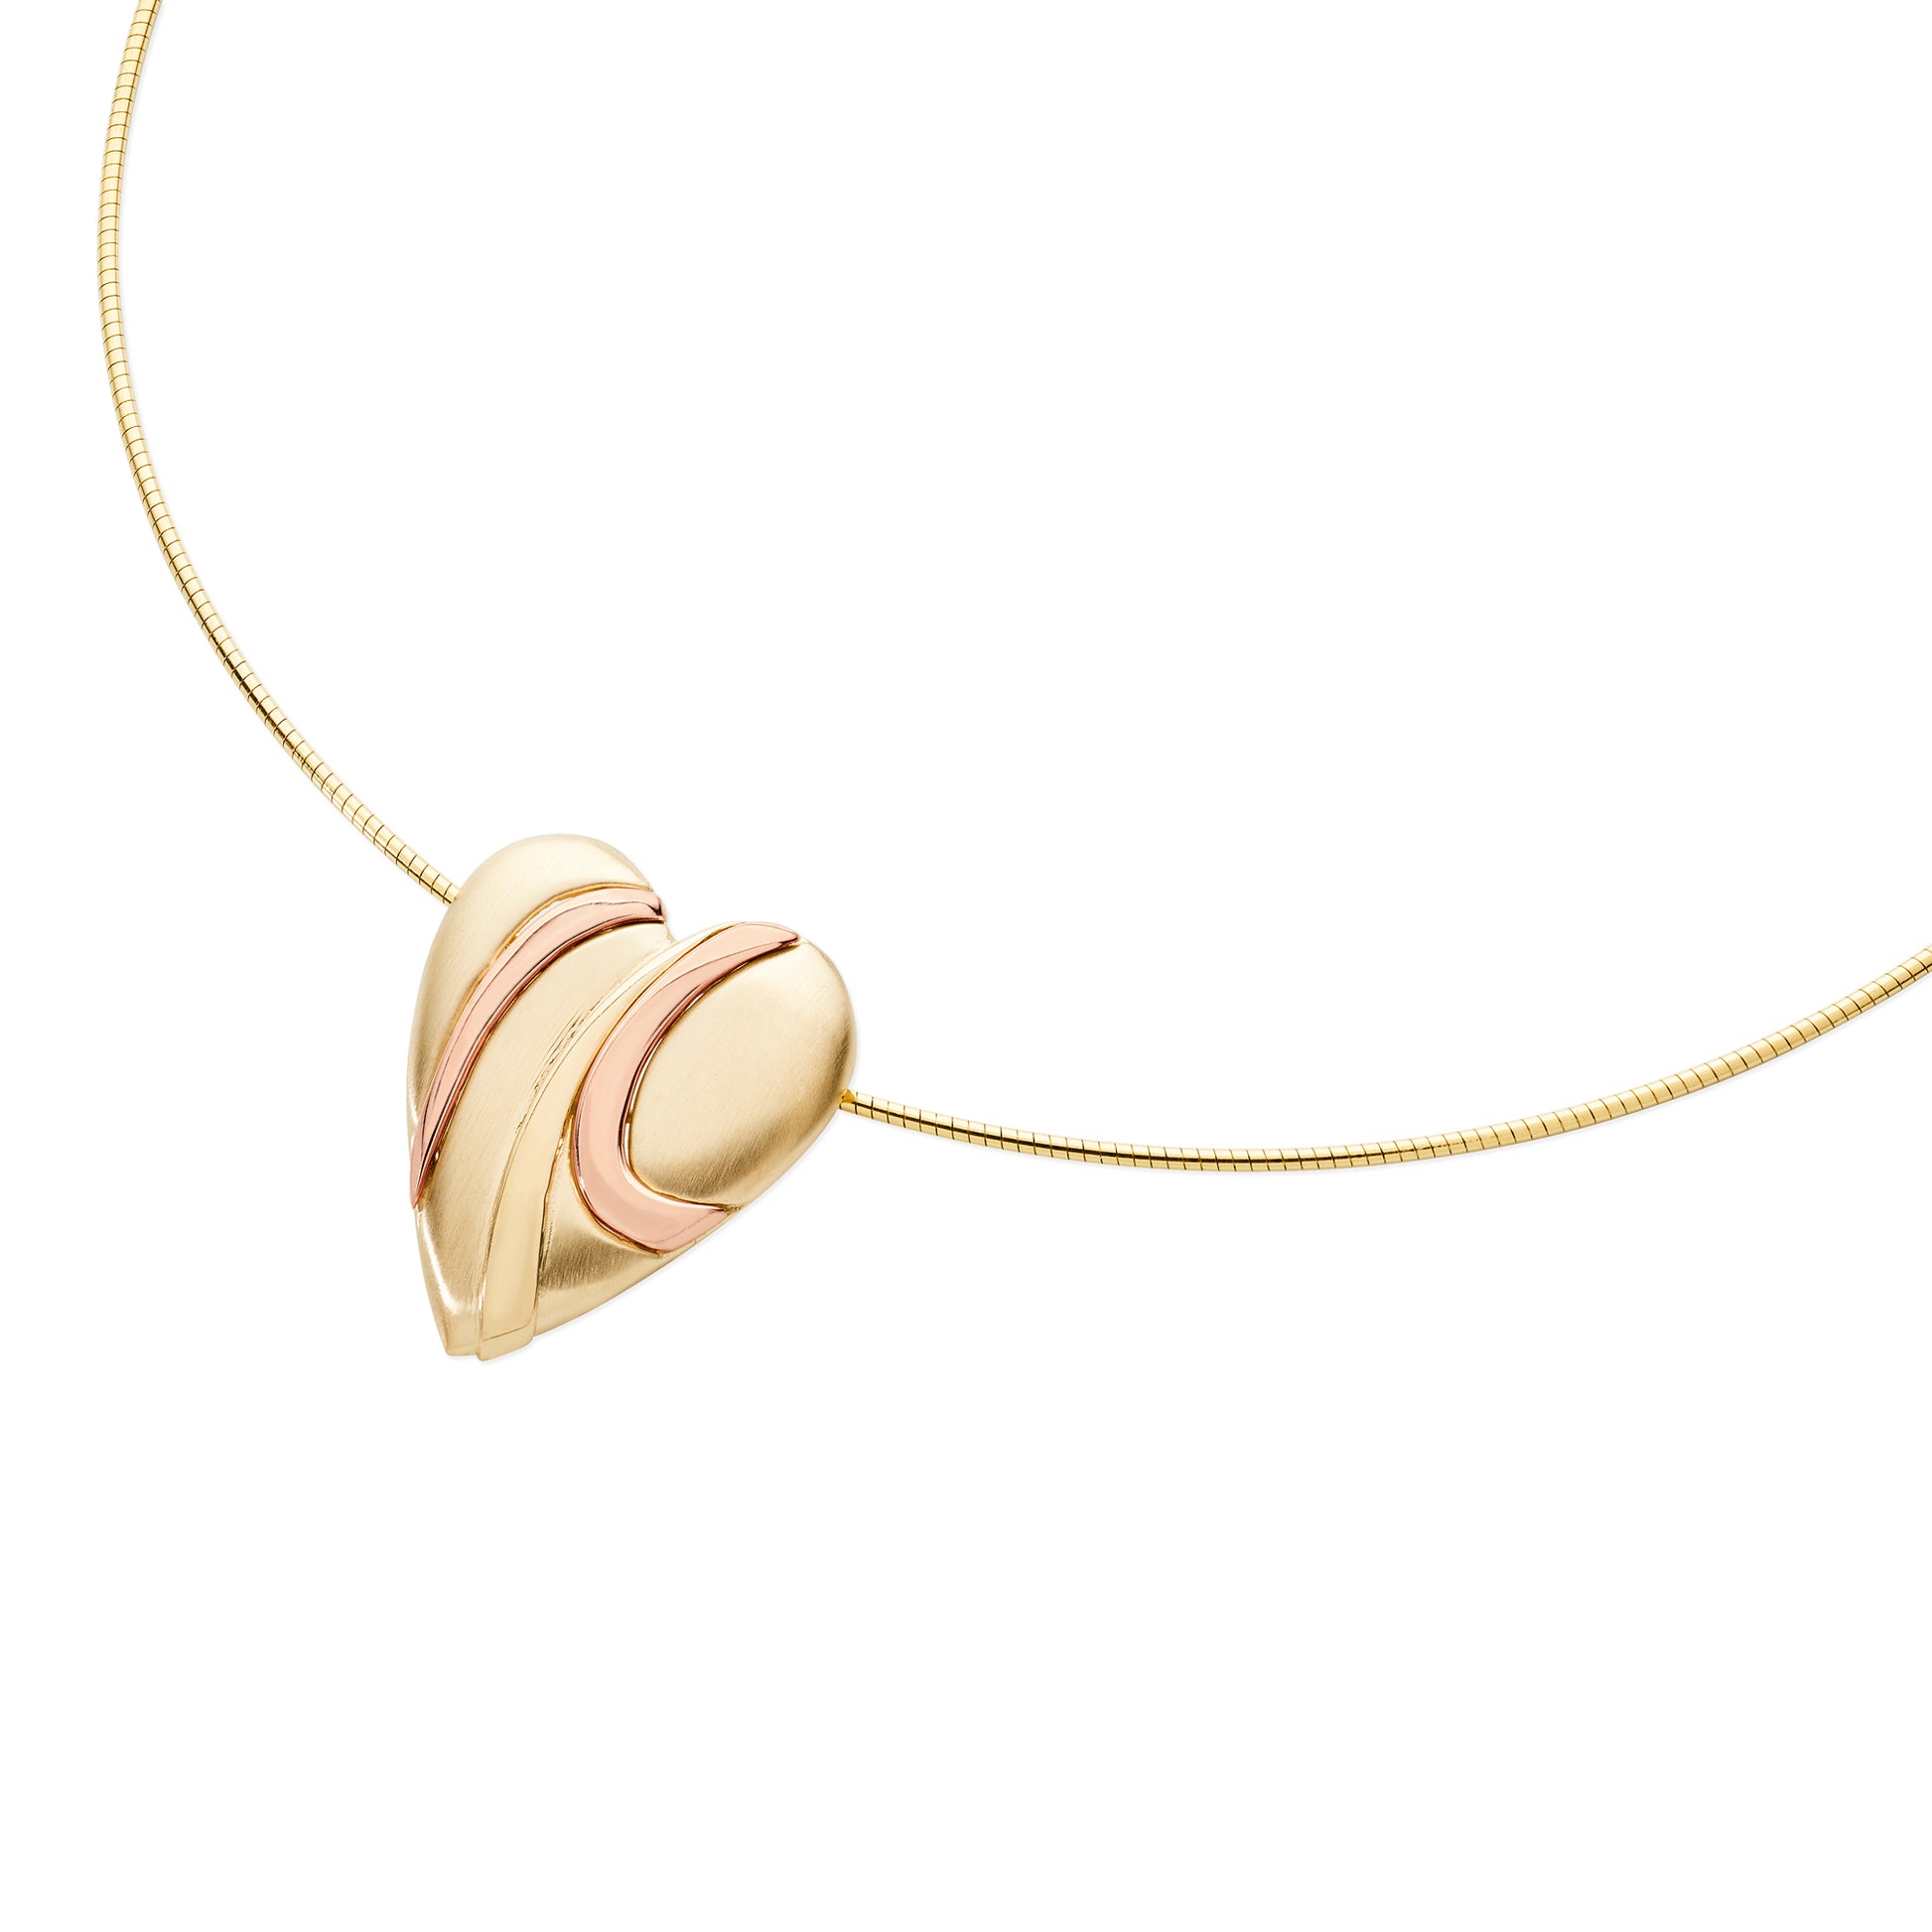 Pebble Heart Neckwire, in Gold, with Rose Gold Detail,  by Aurora Orkney Jewellery, Orkney, Scotland